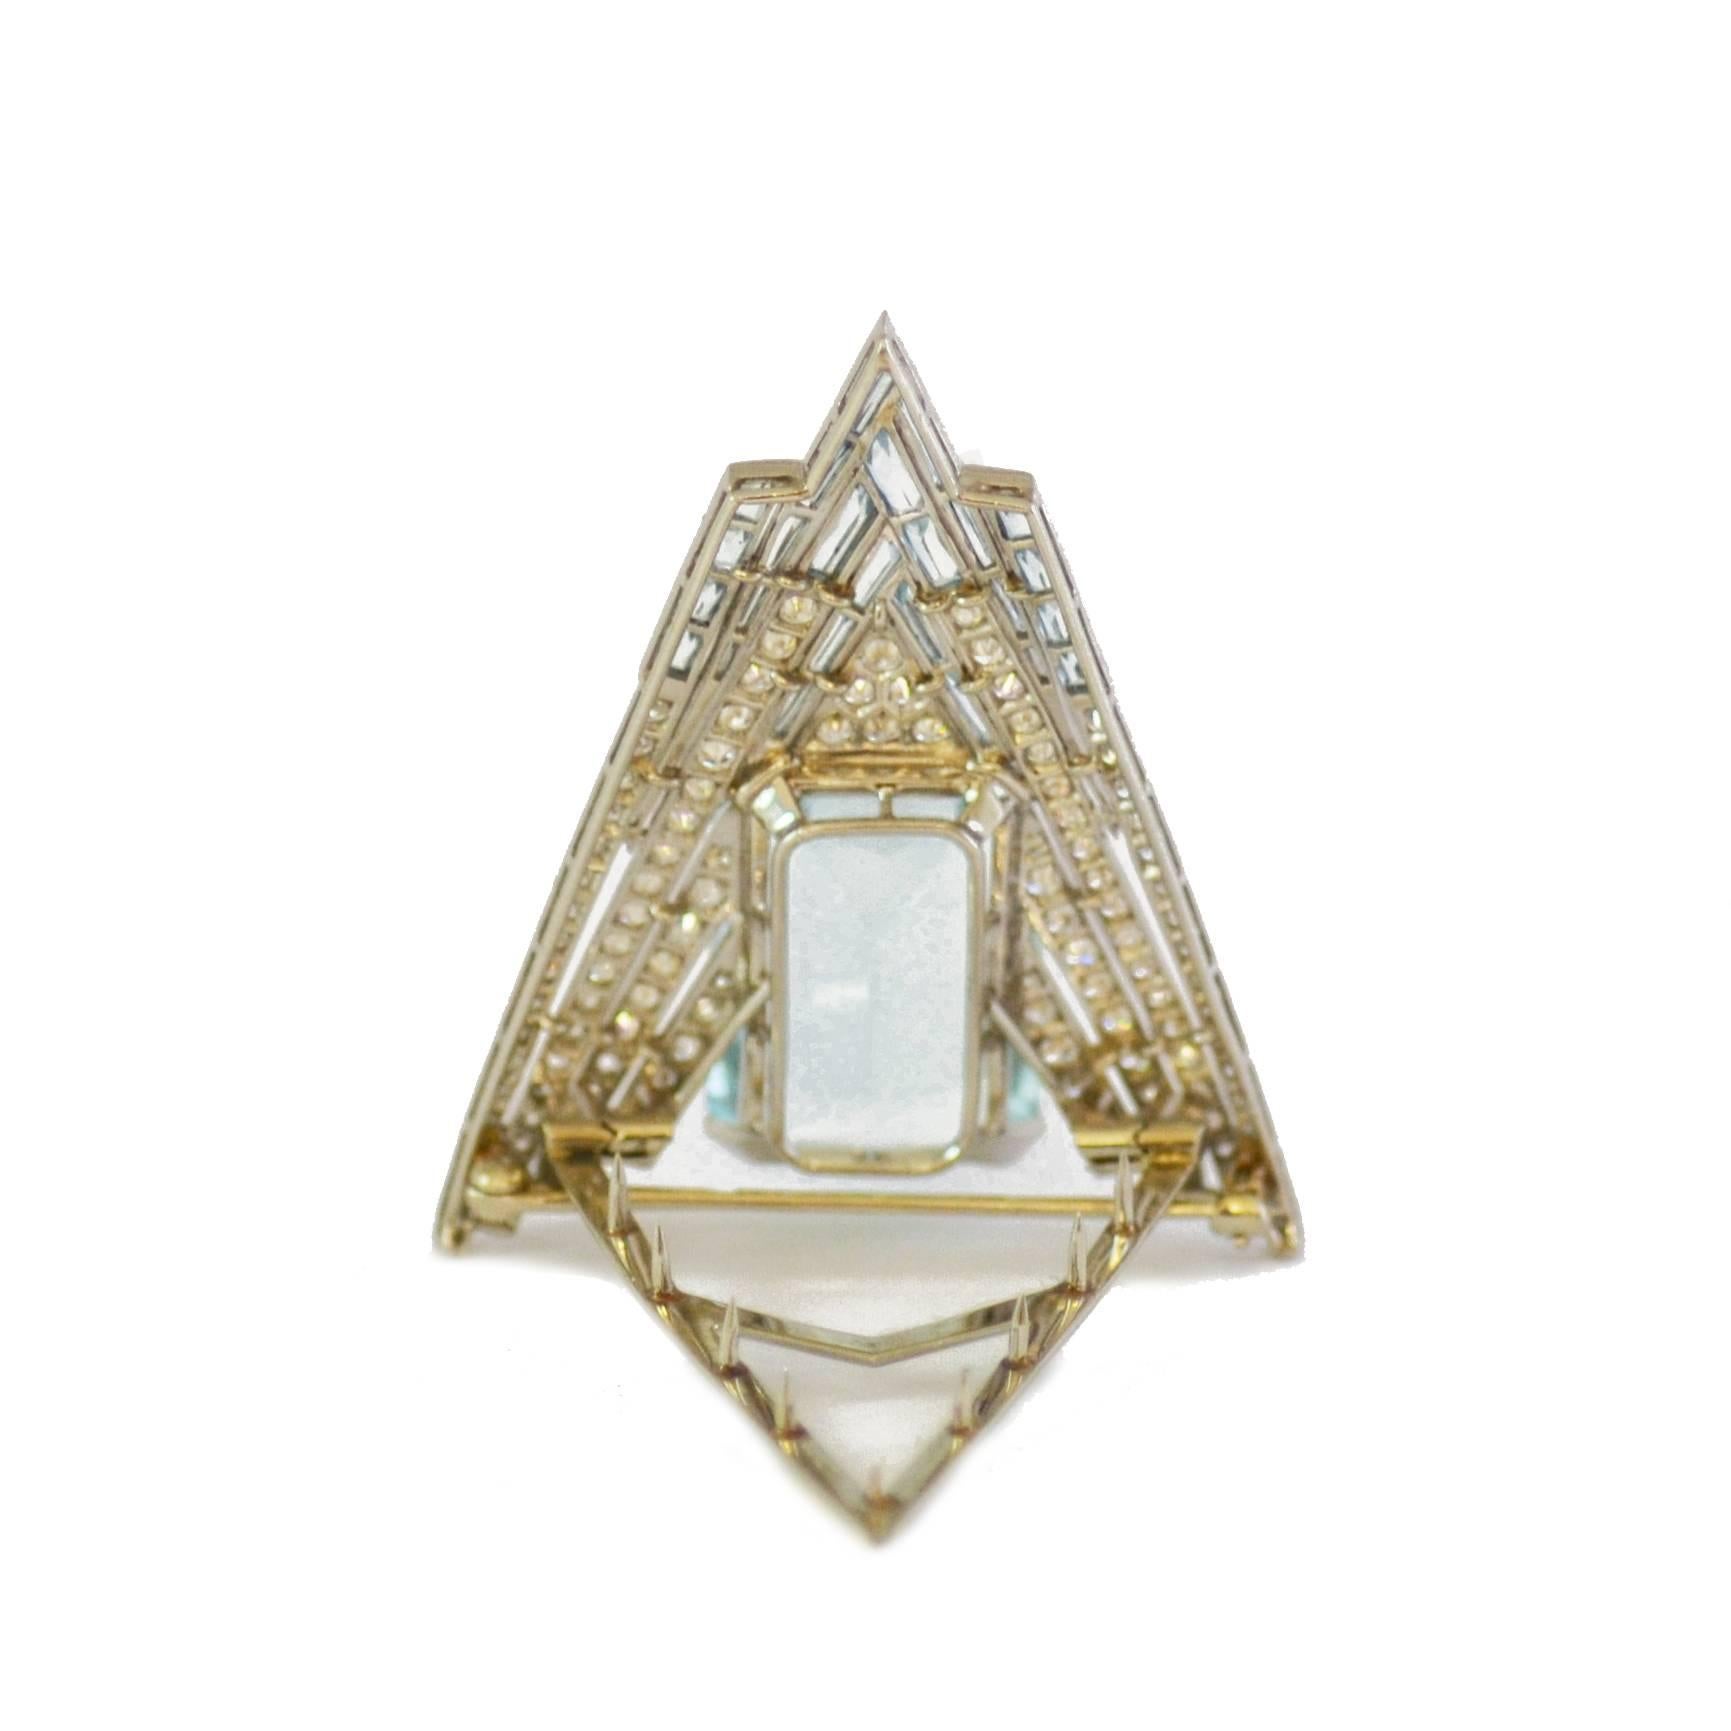 A chevron shaped aquamarine and diamond clip, mounted with a central large aquamarine. Set with brilliant cut diamonds and French cut aquamarines and mounted in platinum. American circa 1930.